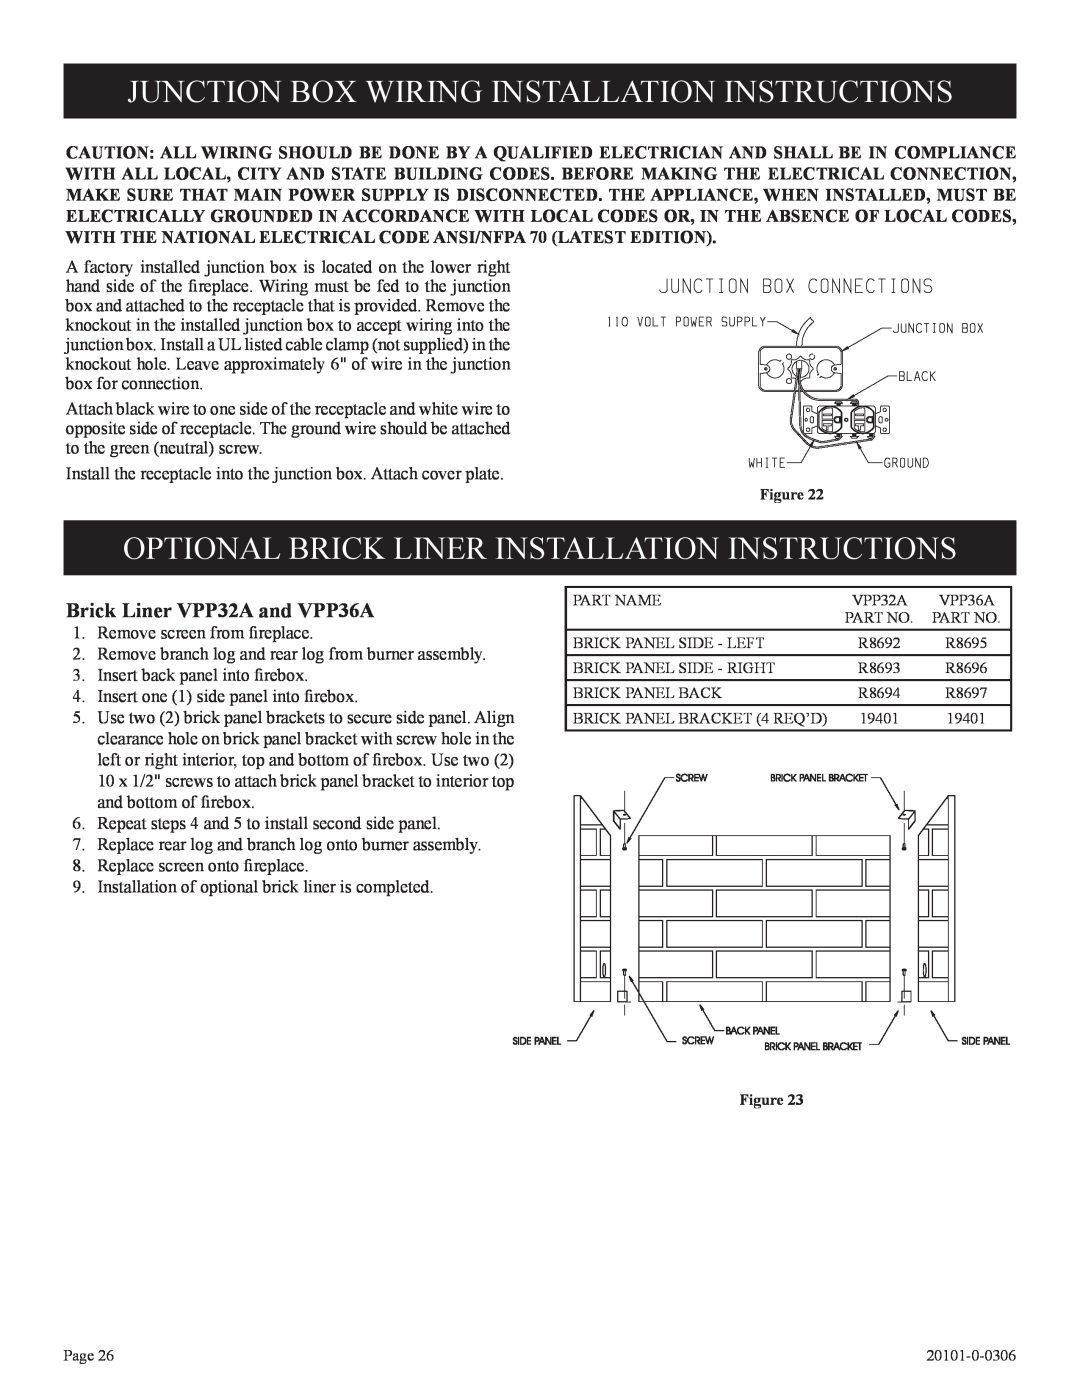 Empire Comfort Systems VFP32FP, VFP36FP, P)-1 Junction Box Wiring Installation Instructions, Brick Liner VPP32A and VPP36A 